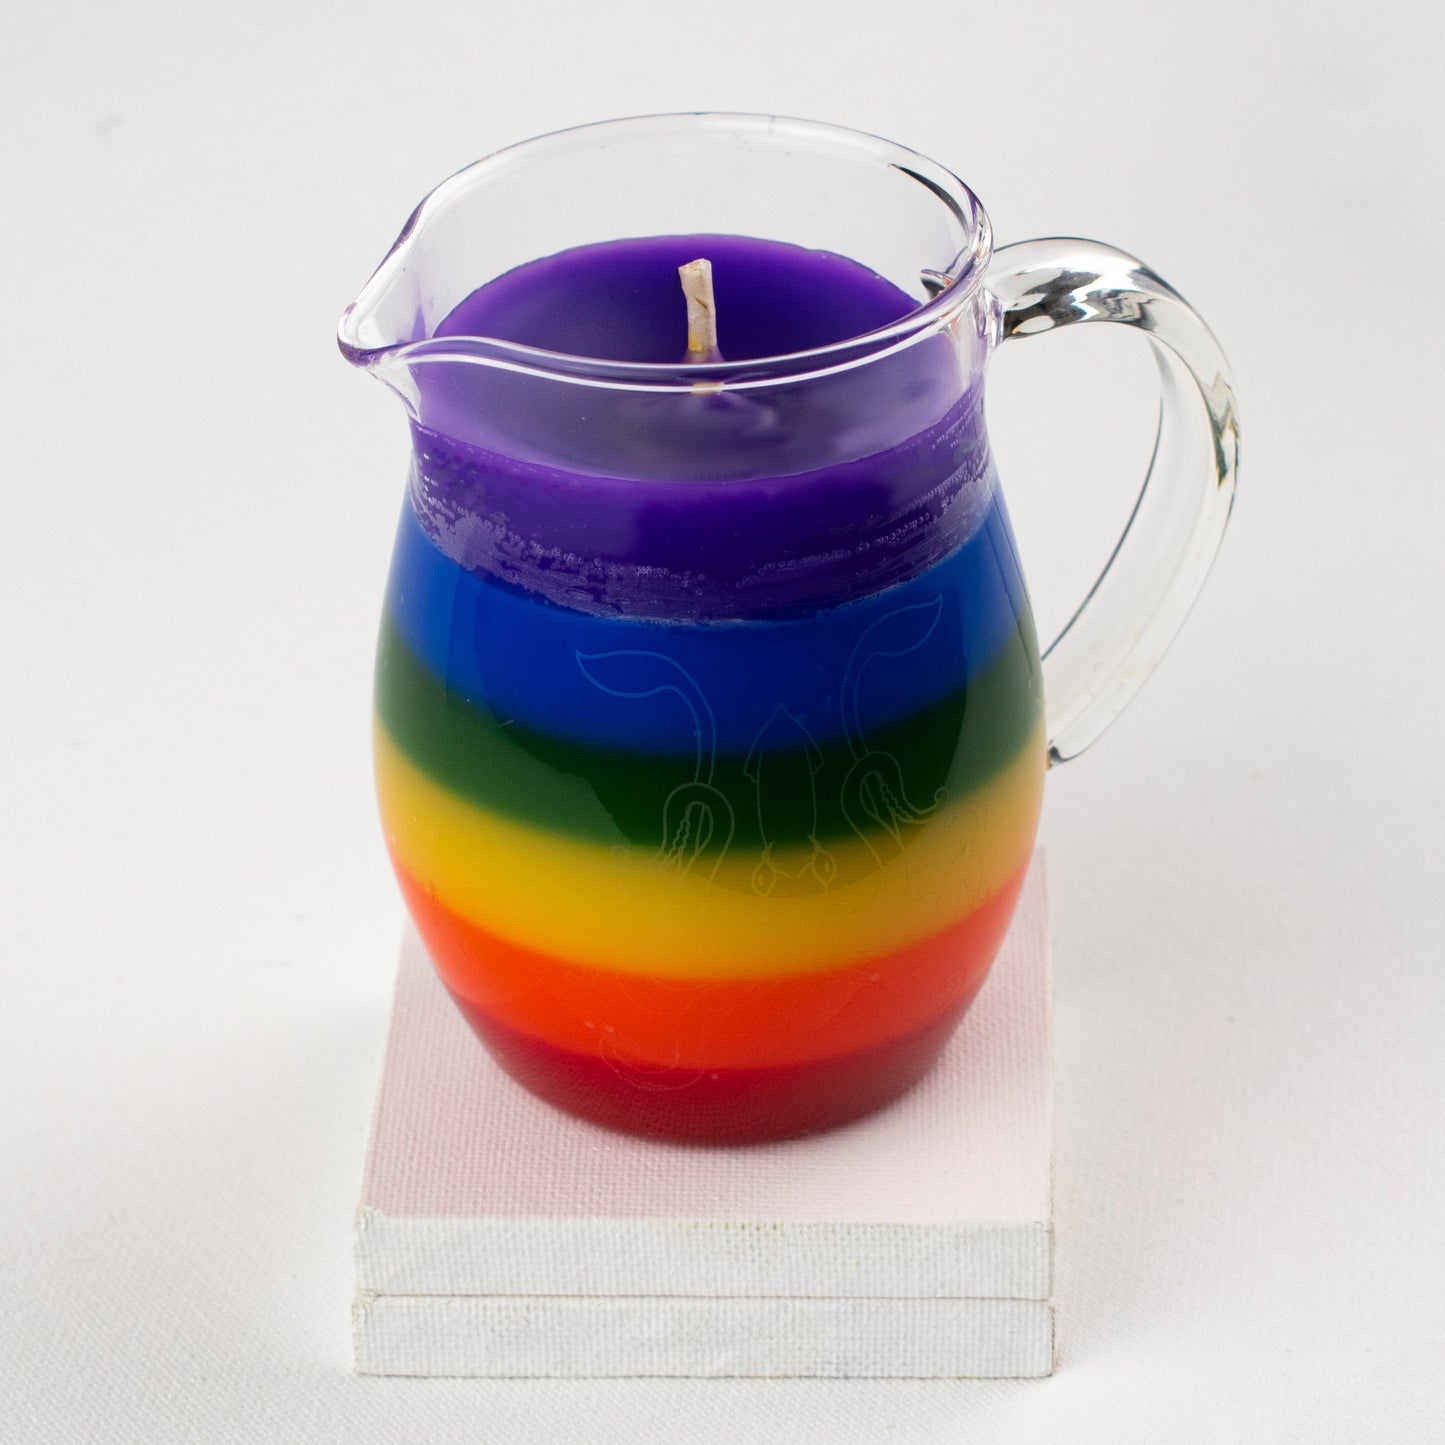 Classic Wax Play Pitcher Candle - Low Temp - Χωρίς άρωμα - Παραφίνη